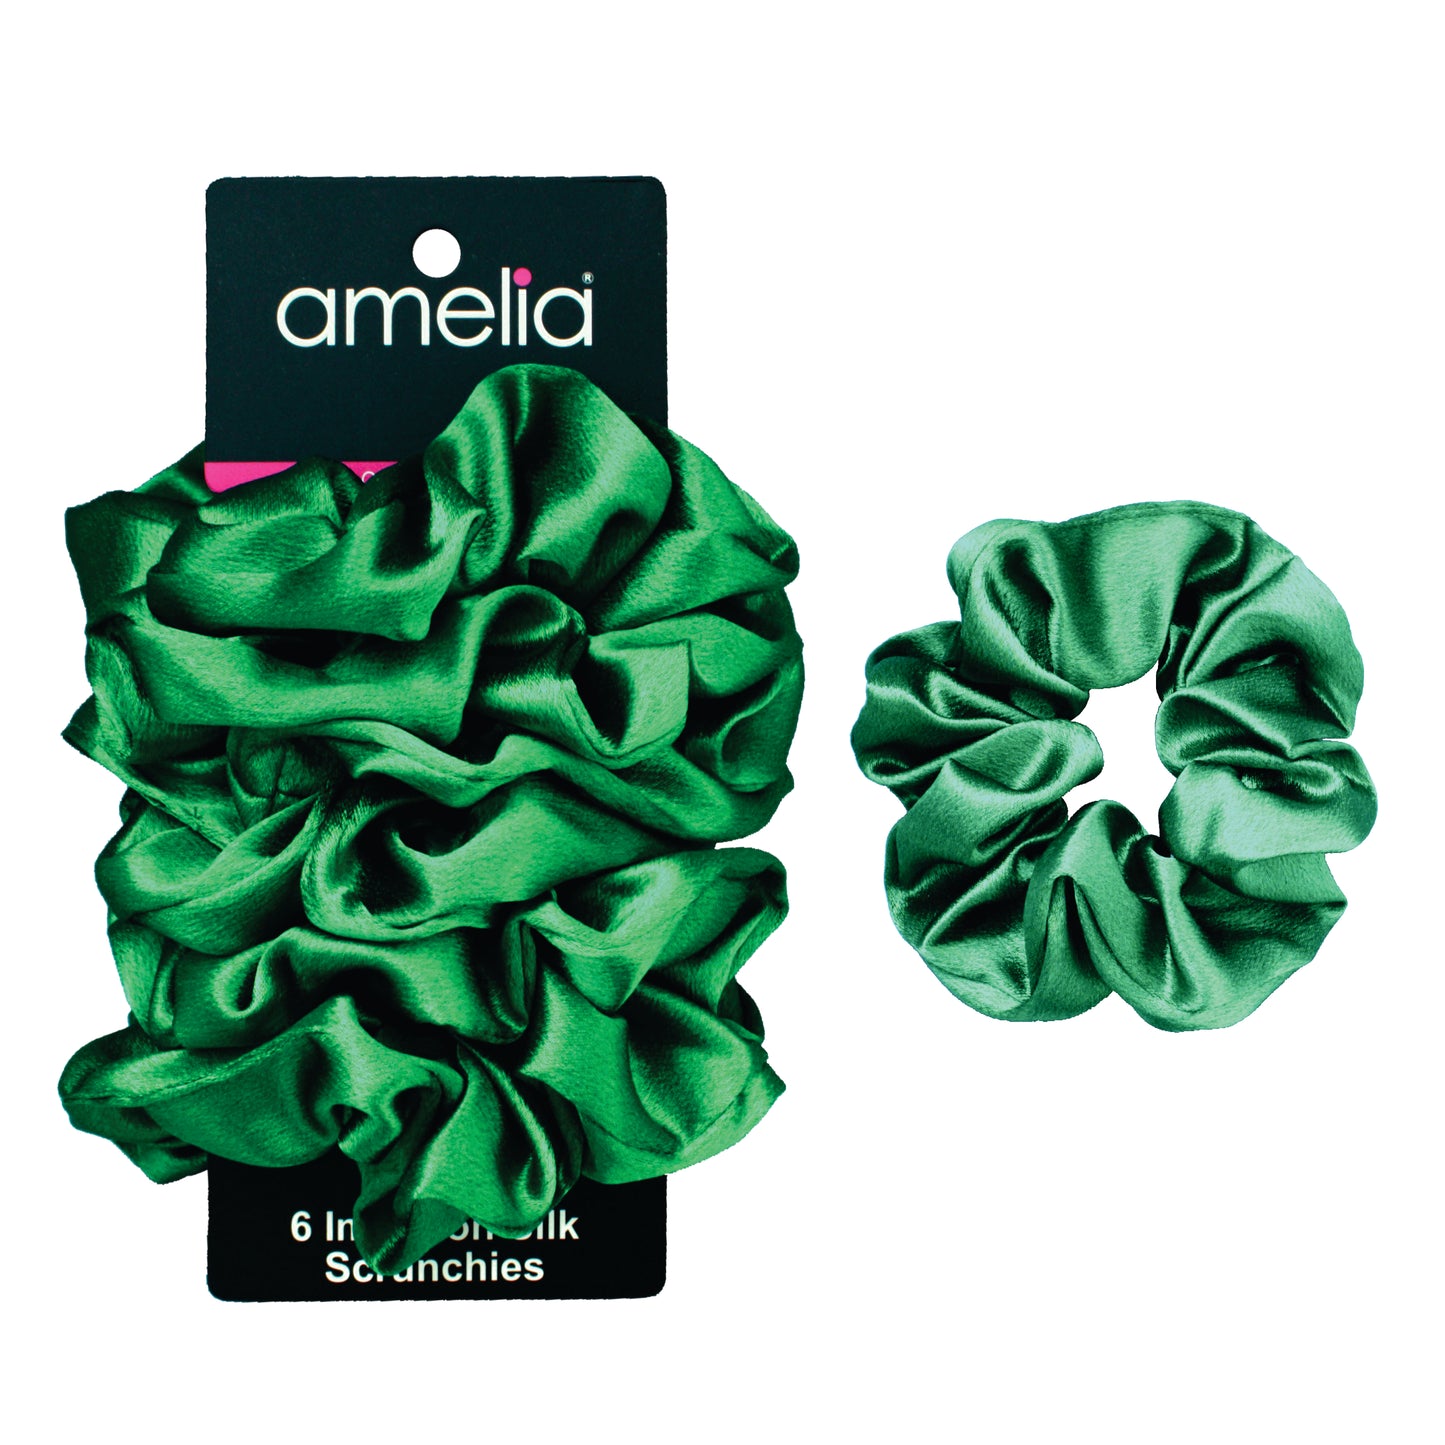 Amelia Beauty Products, Green Imitation Silk Scrunchies, 4.5in Diameter, Gentle on Hair, Strong Hold, No Snag, No Dents or Creases. 6 Pack